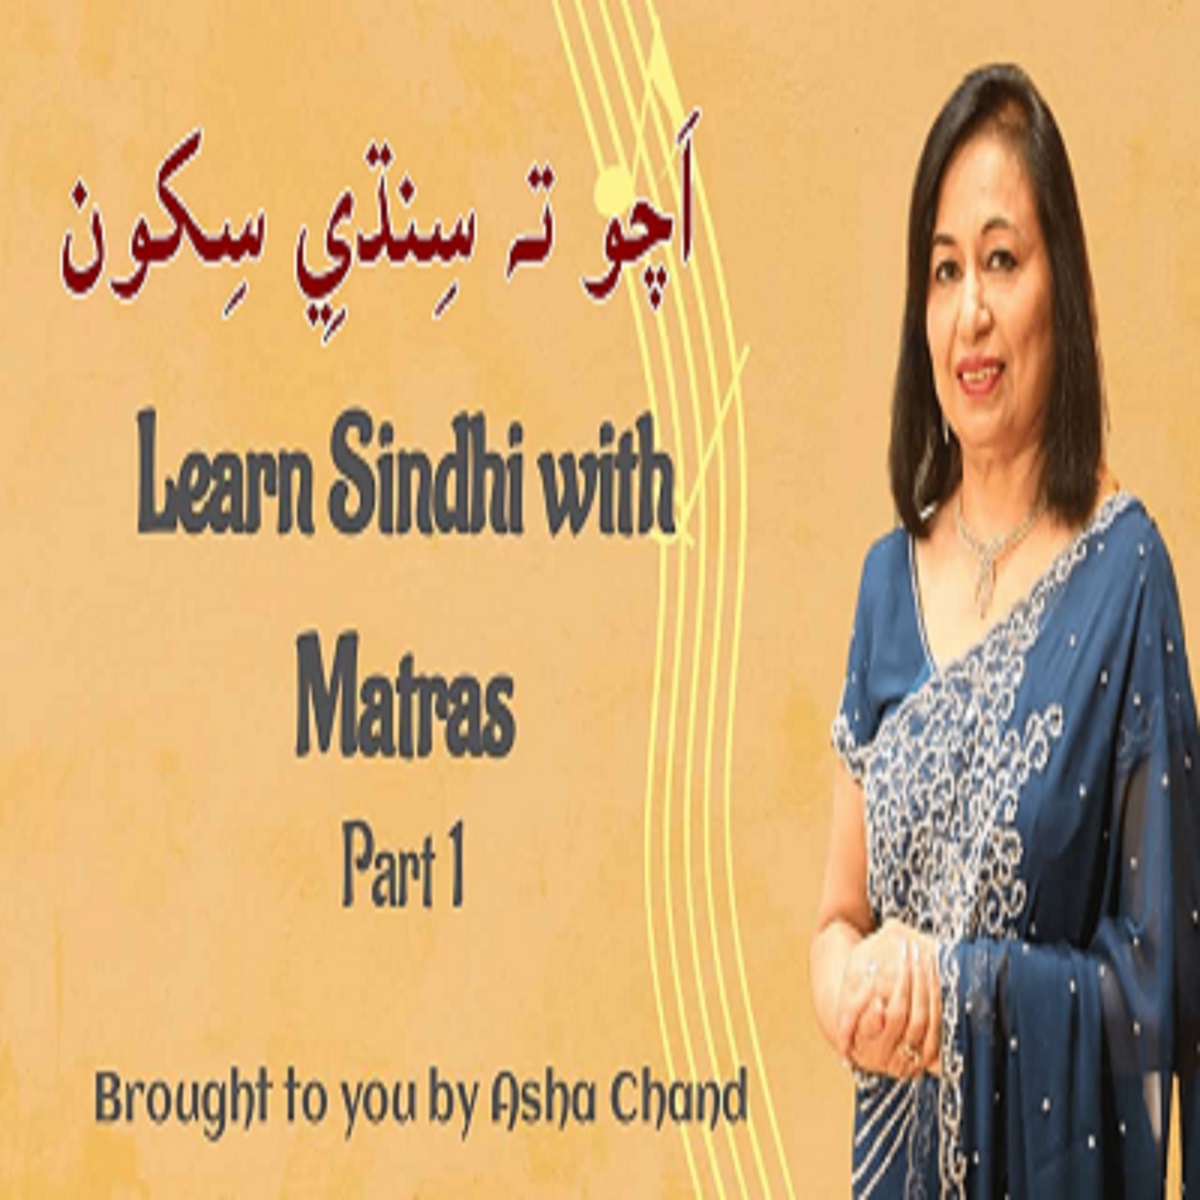 Learn Sindhi with Matras Part 1